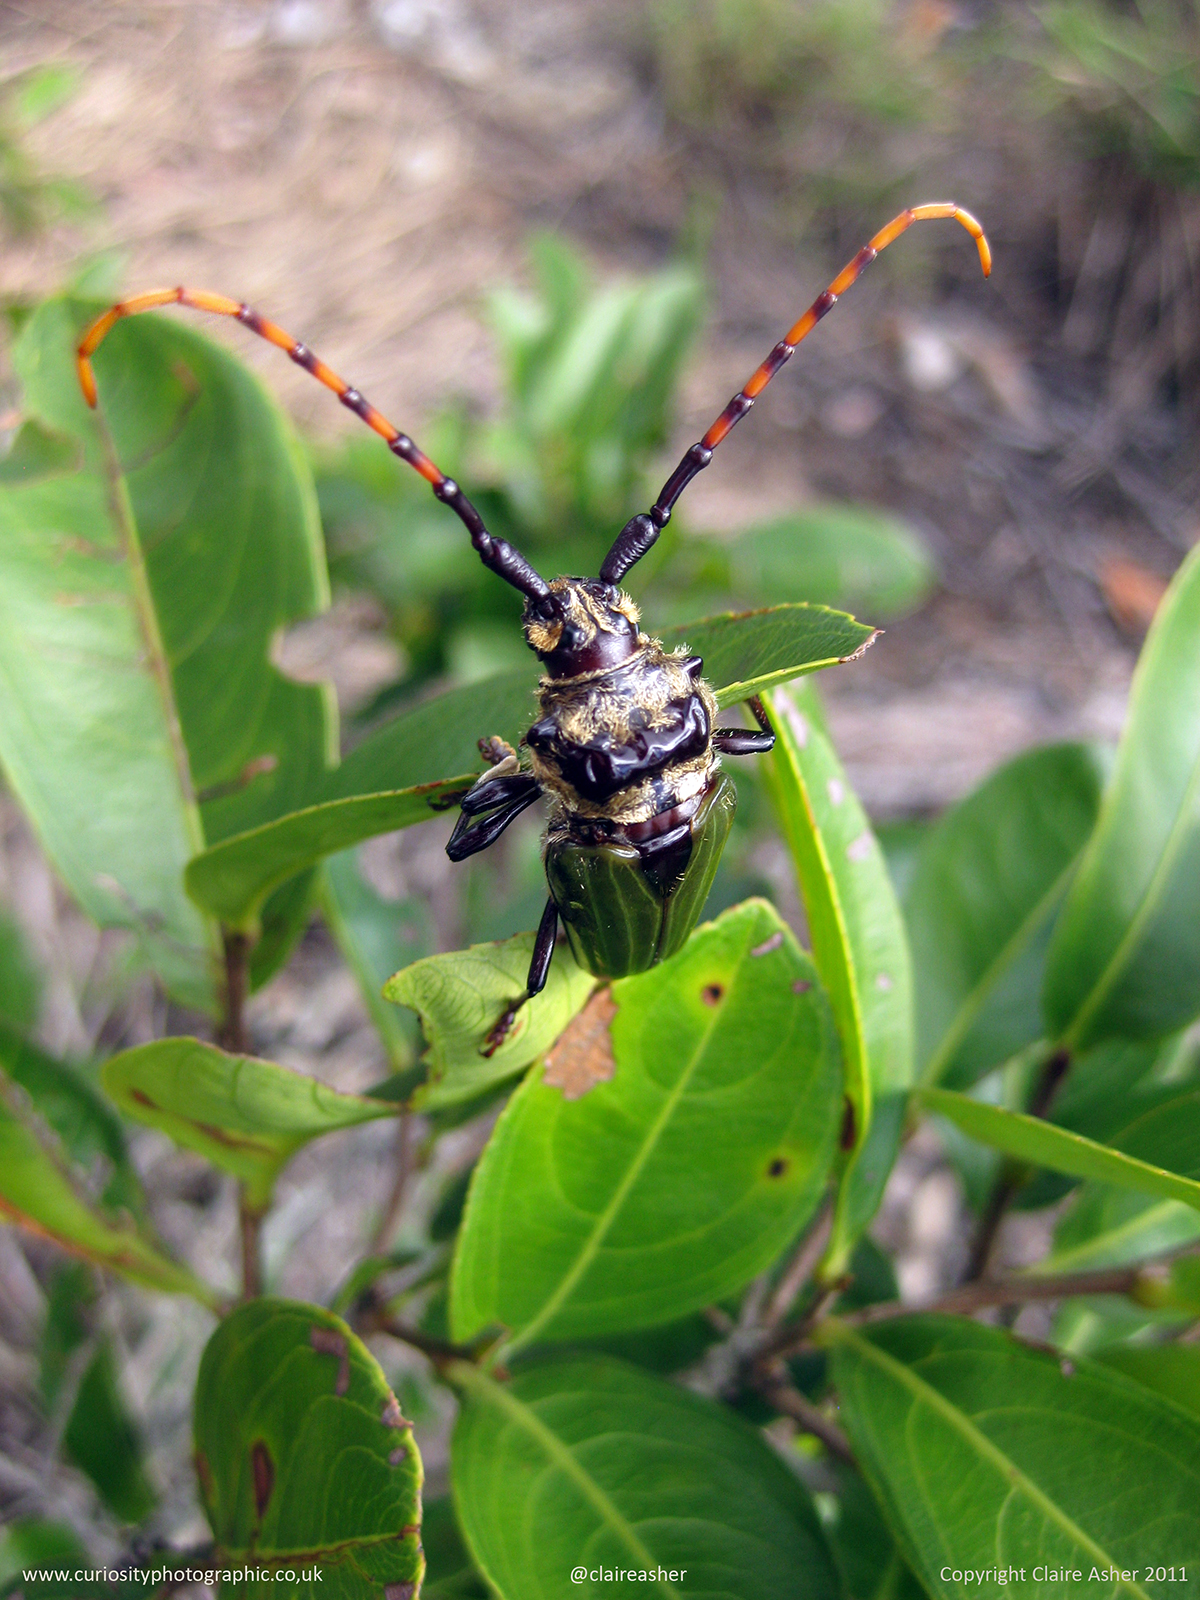 A beetle photographed in Brazil in 2011